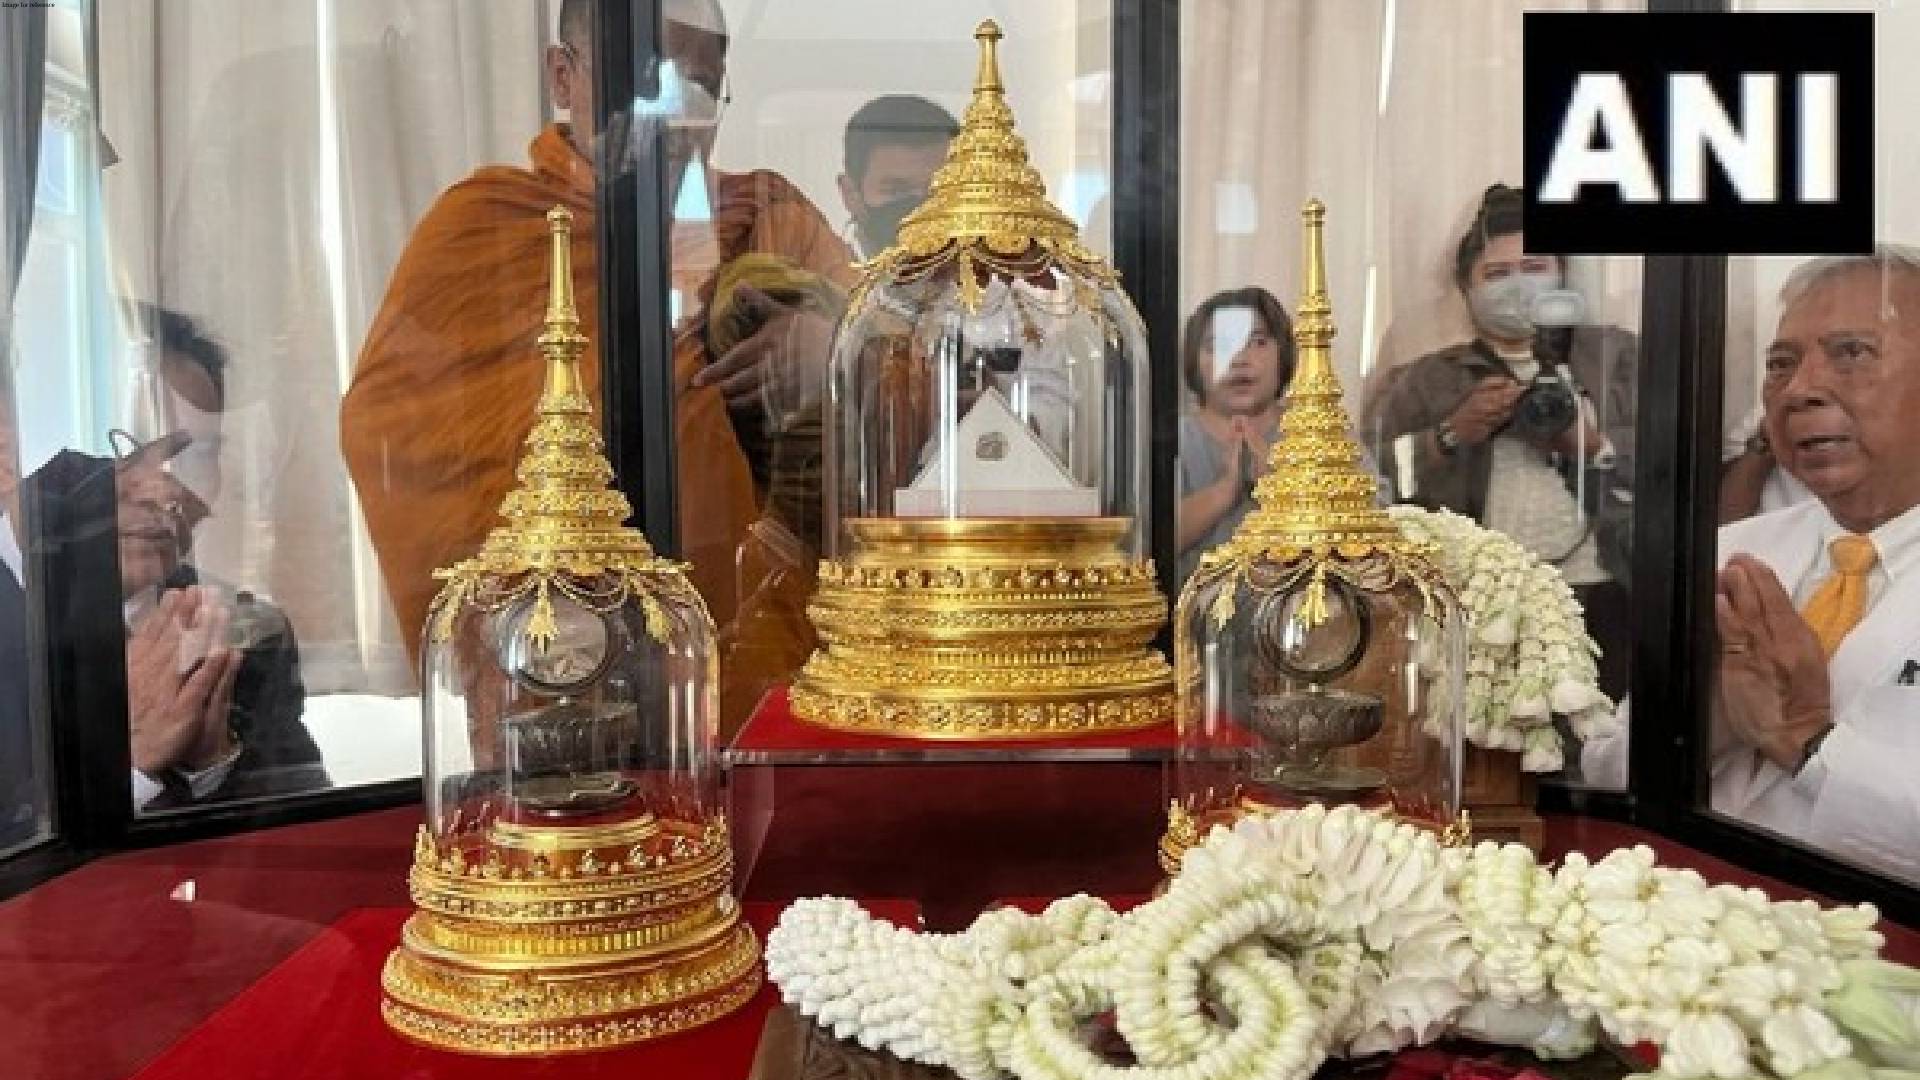 Grand spectacle of holy procession: Relics of Lord Buddha to be temporarily enshrined in Bangkok Royal Ground